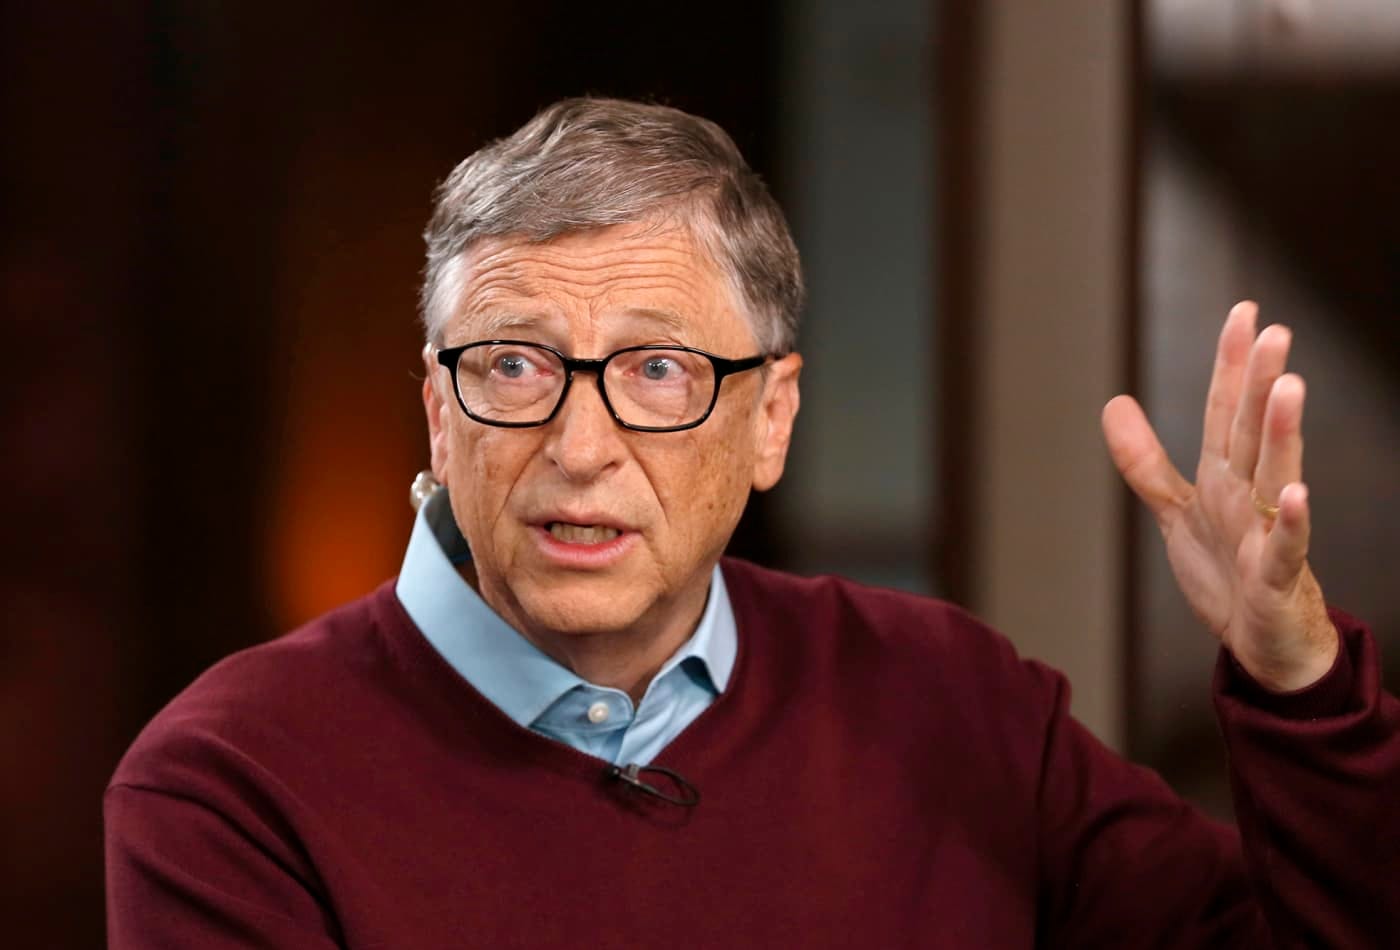 Bill Gates suggests higher taxes on 'those with great wealth'